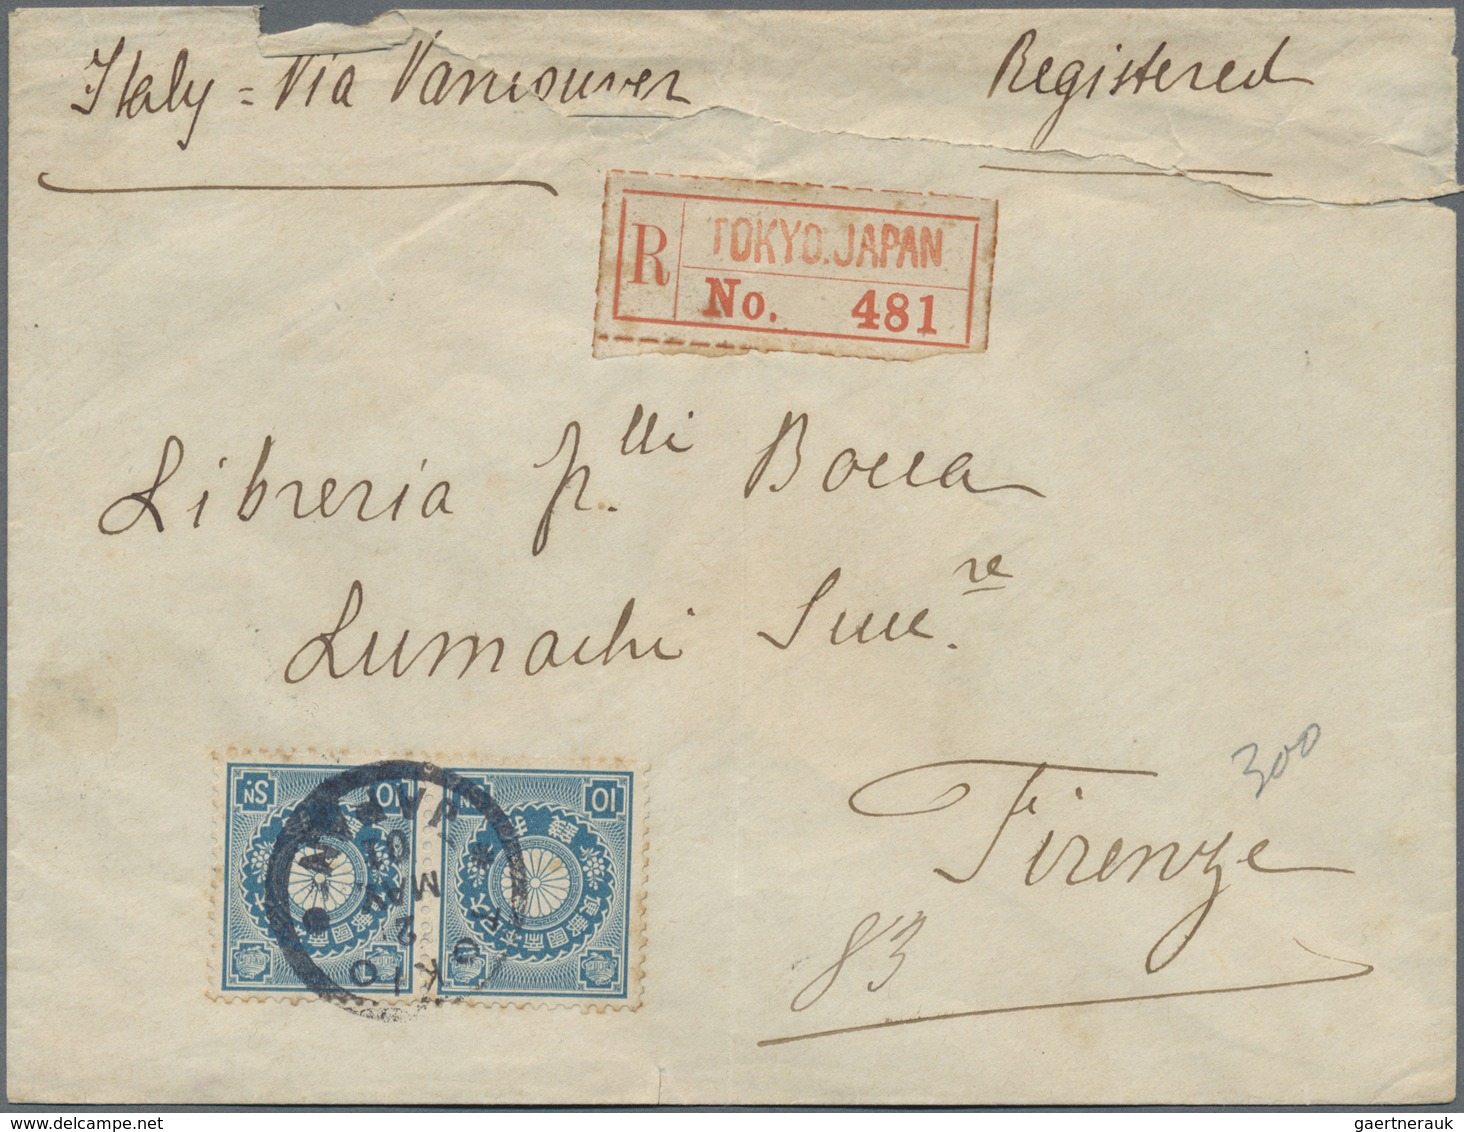 Br Japan: 1876/1914, covers (11 inc. registered x4) mostly to Italy inc. from "Institute for infectiono